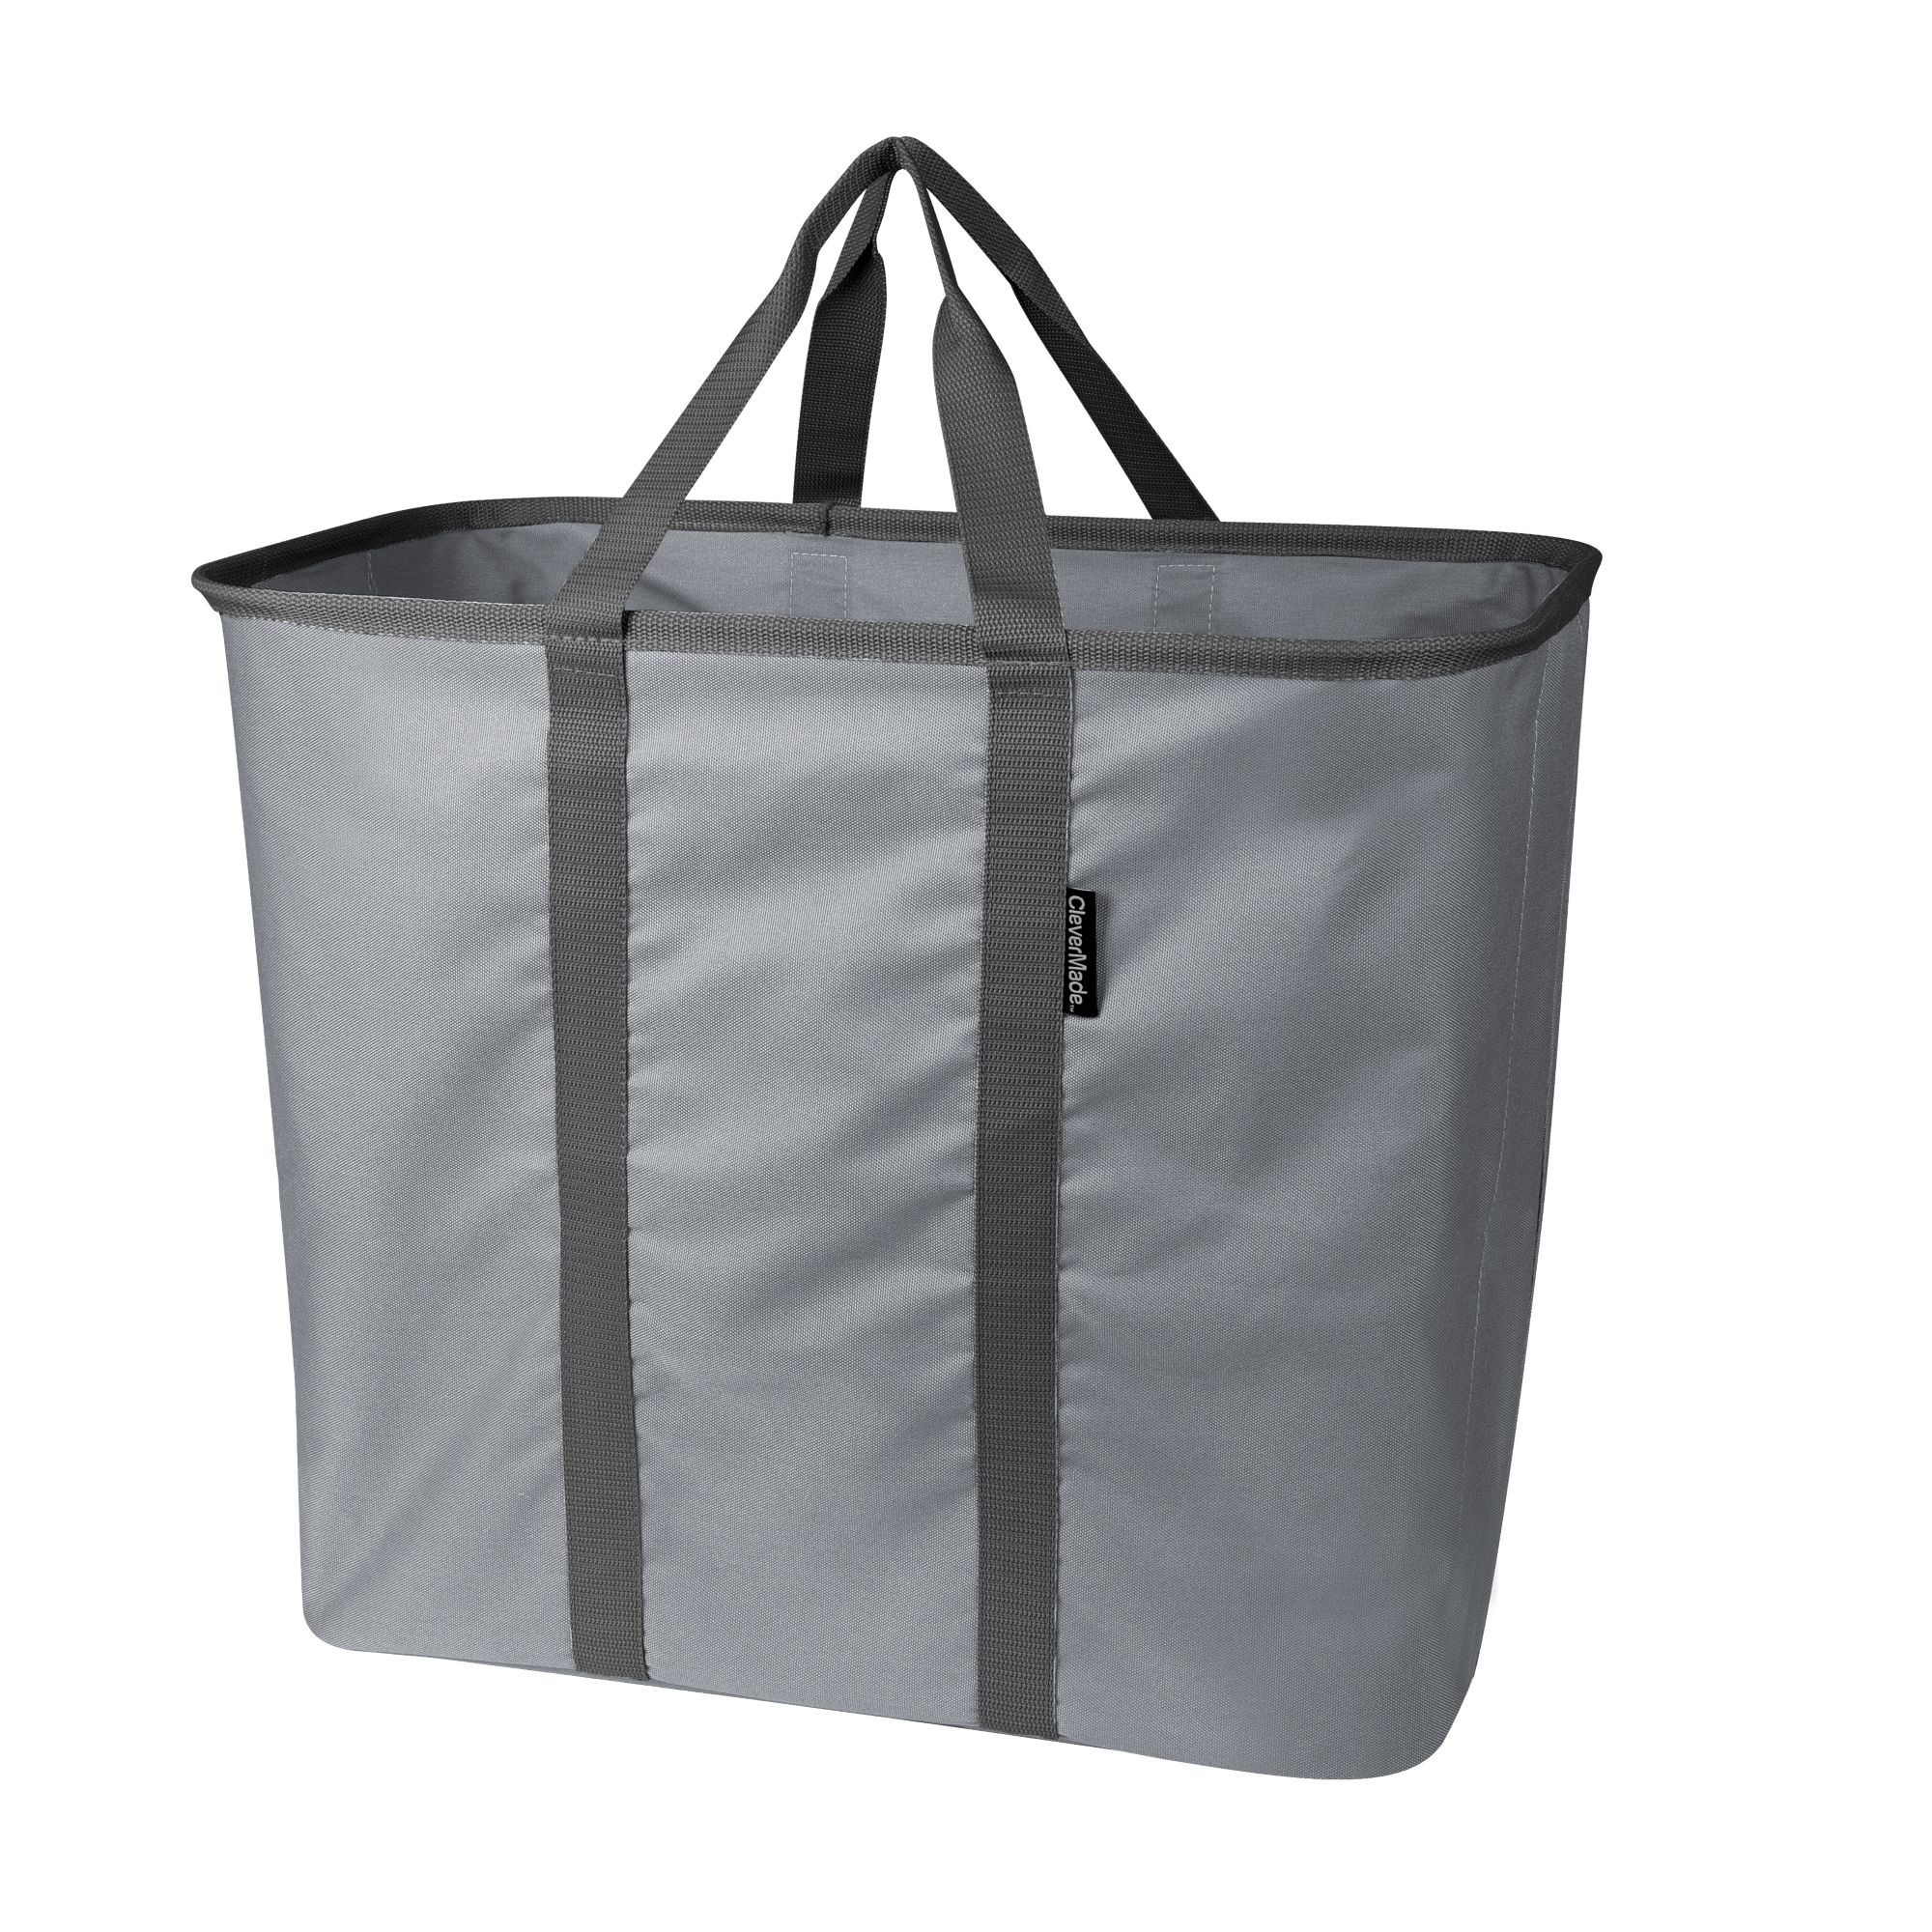 collapsible laundry tote